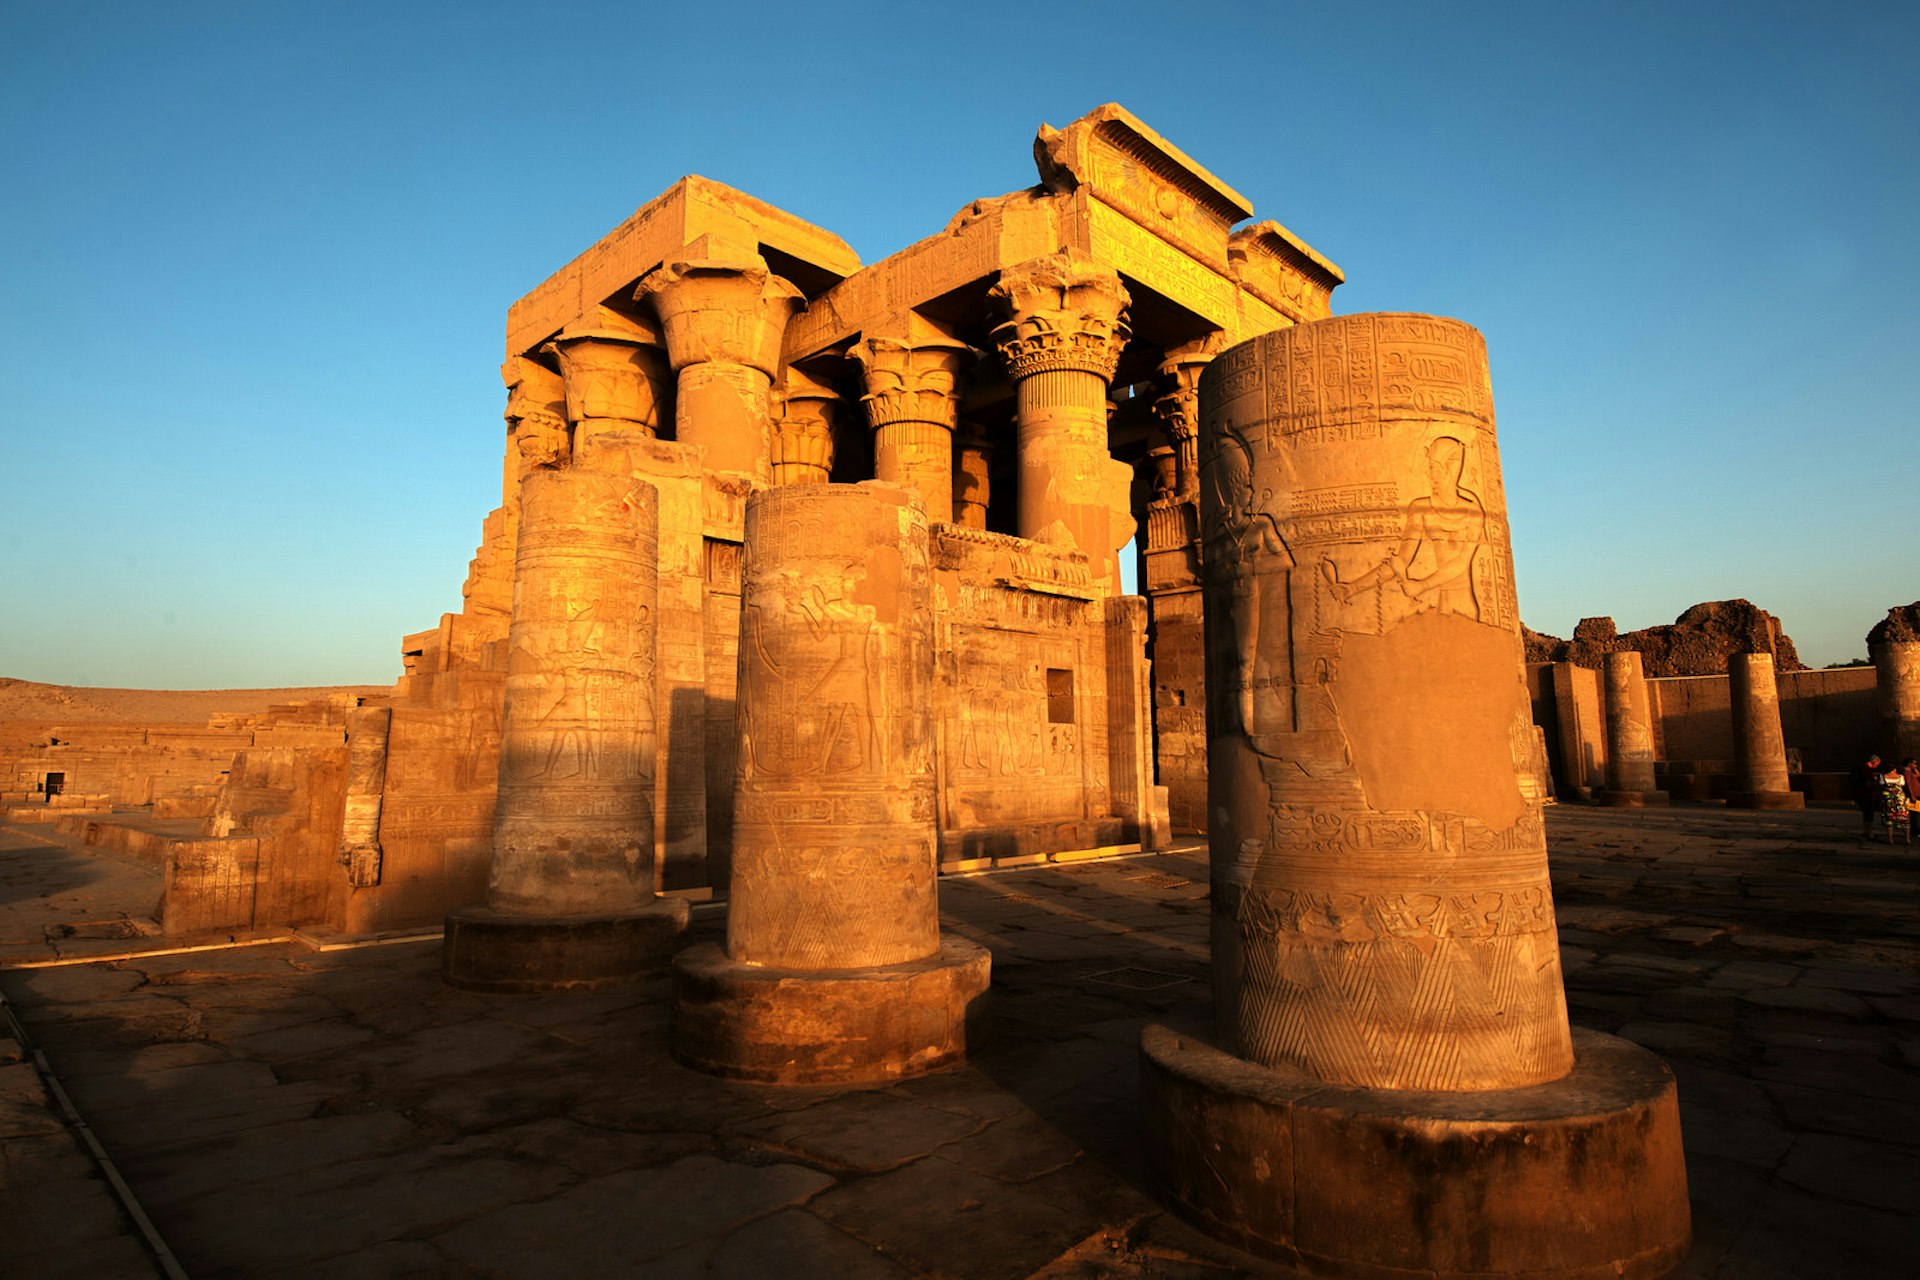 Kom ombo temple in Egypt. Sachin Vijayan Photography / Getty Images